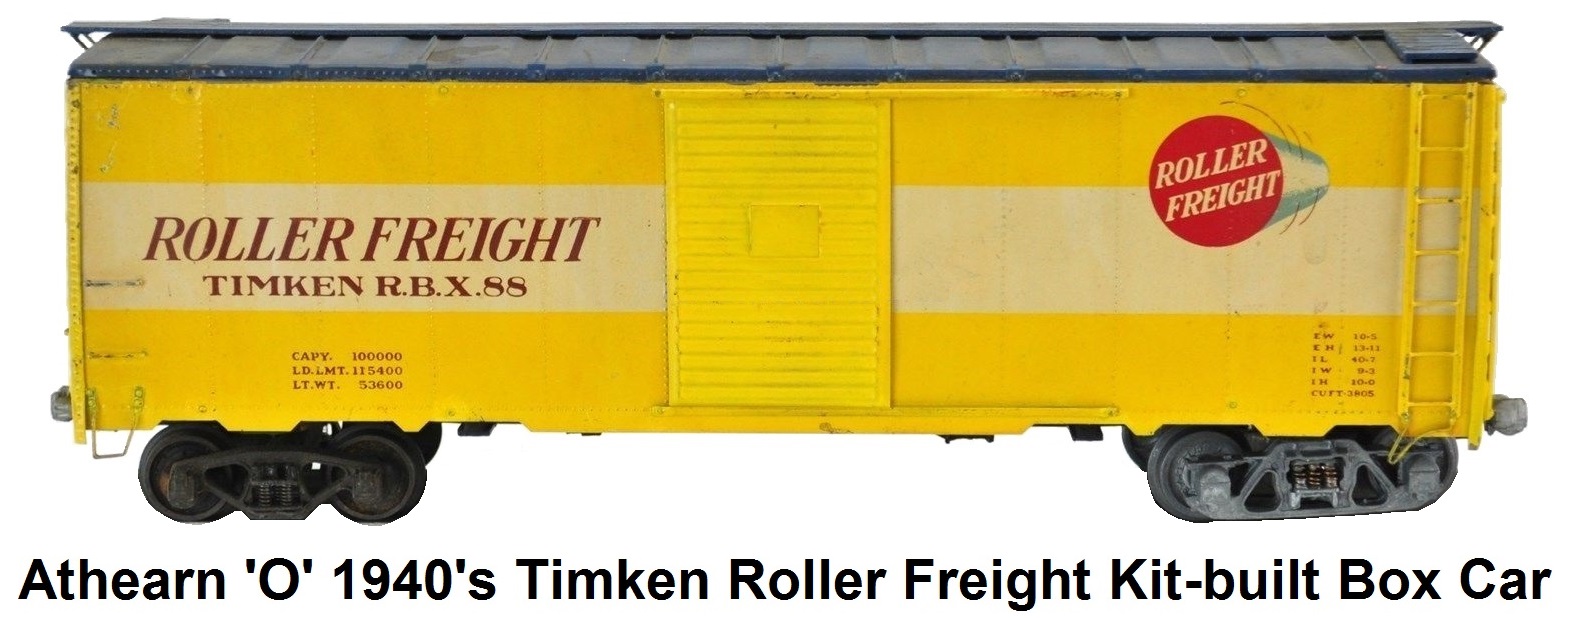 Athearn 'O' scale Timken Roller Freight 1940's Kit-built Wood With Metal Skin Box Car